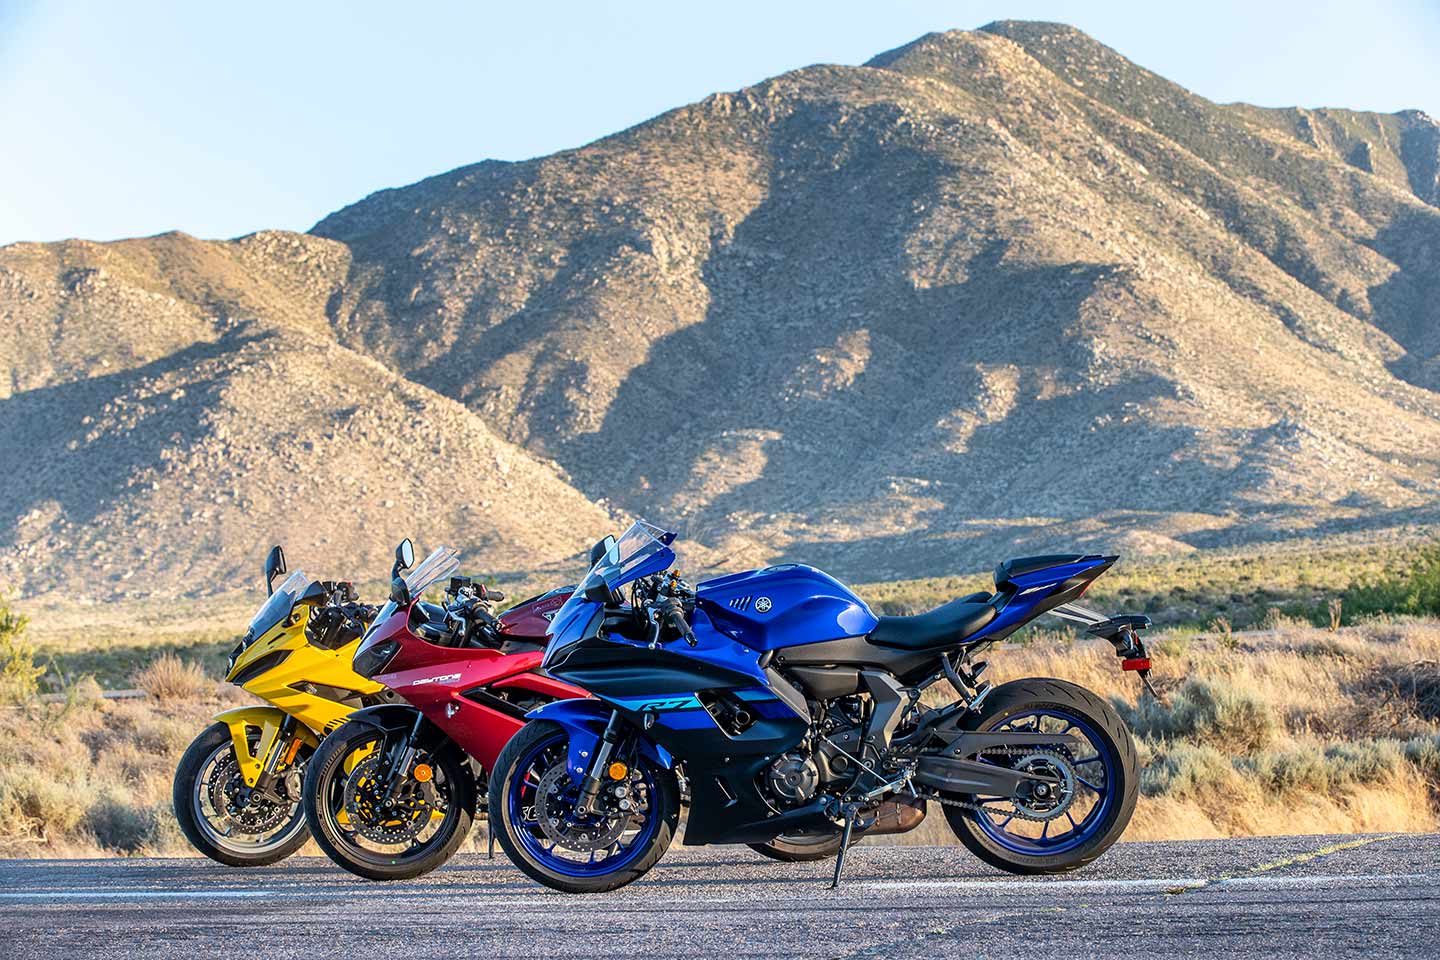 They may have many things in common but ultimately these three bikes lean toward three different riders. But there is one that is versatile enough to appeal to the largest range of riders.